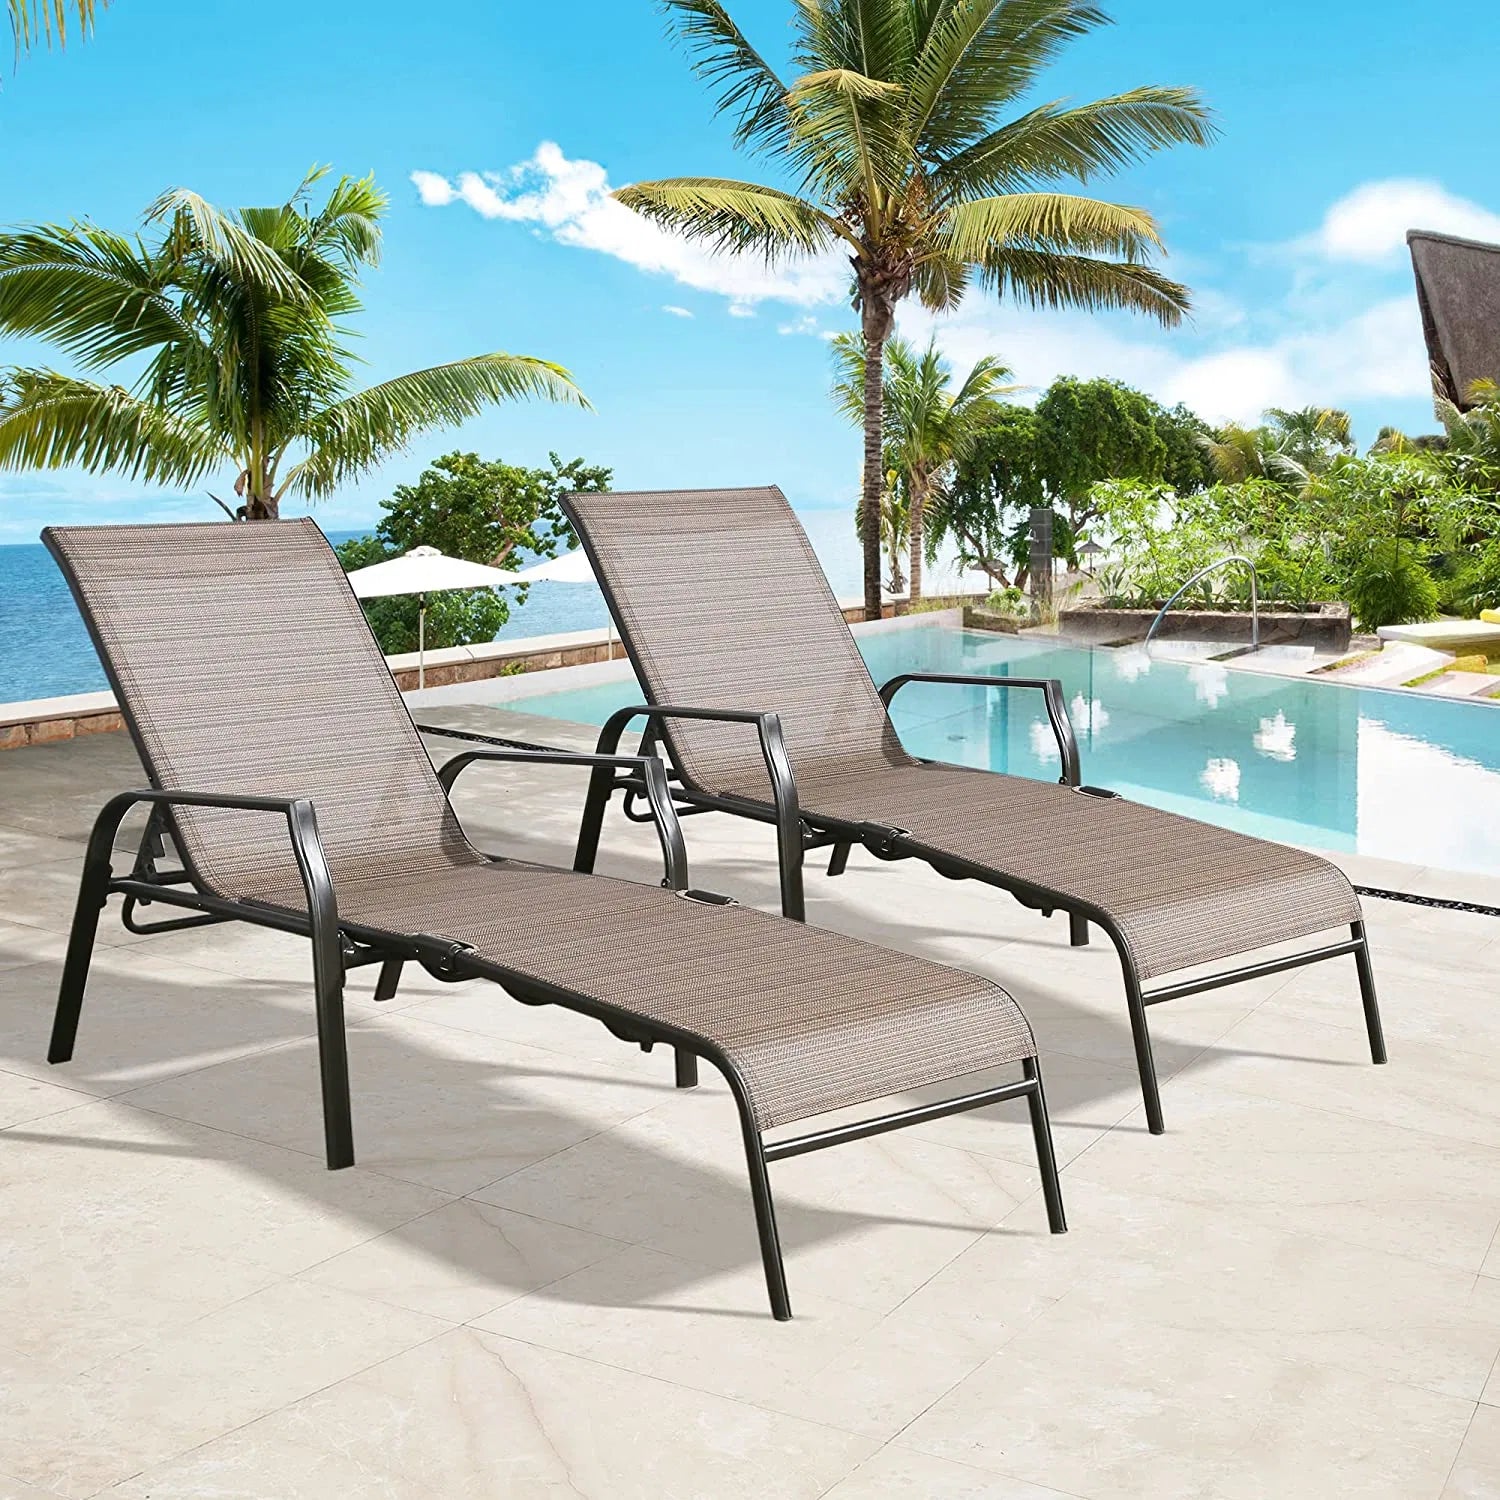 Folding Sling Reclining Chaise Lounge Chairs for Beach, Yard, Pool, and Patio